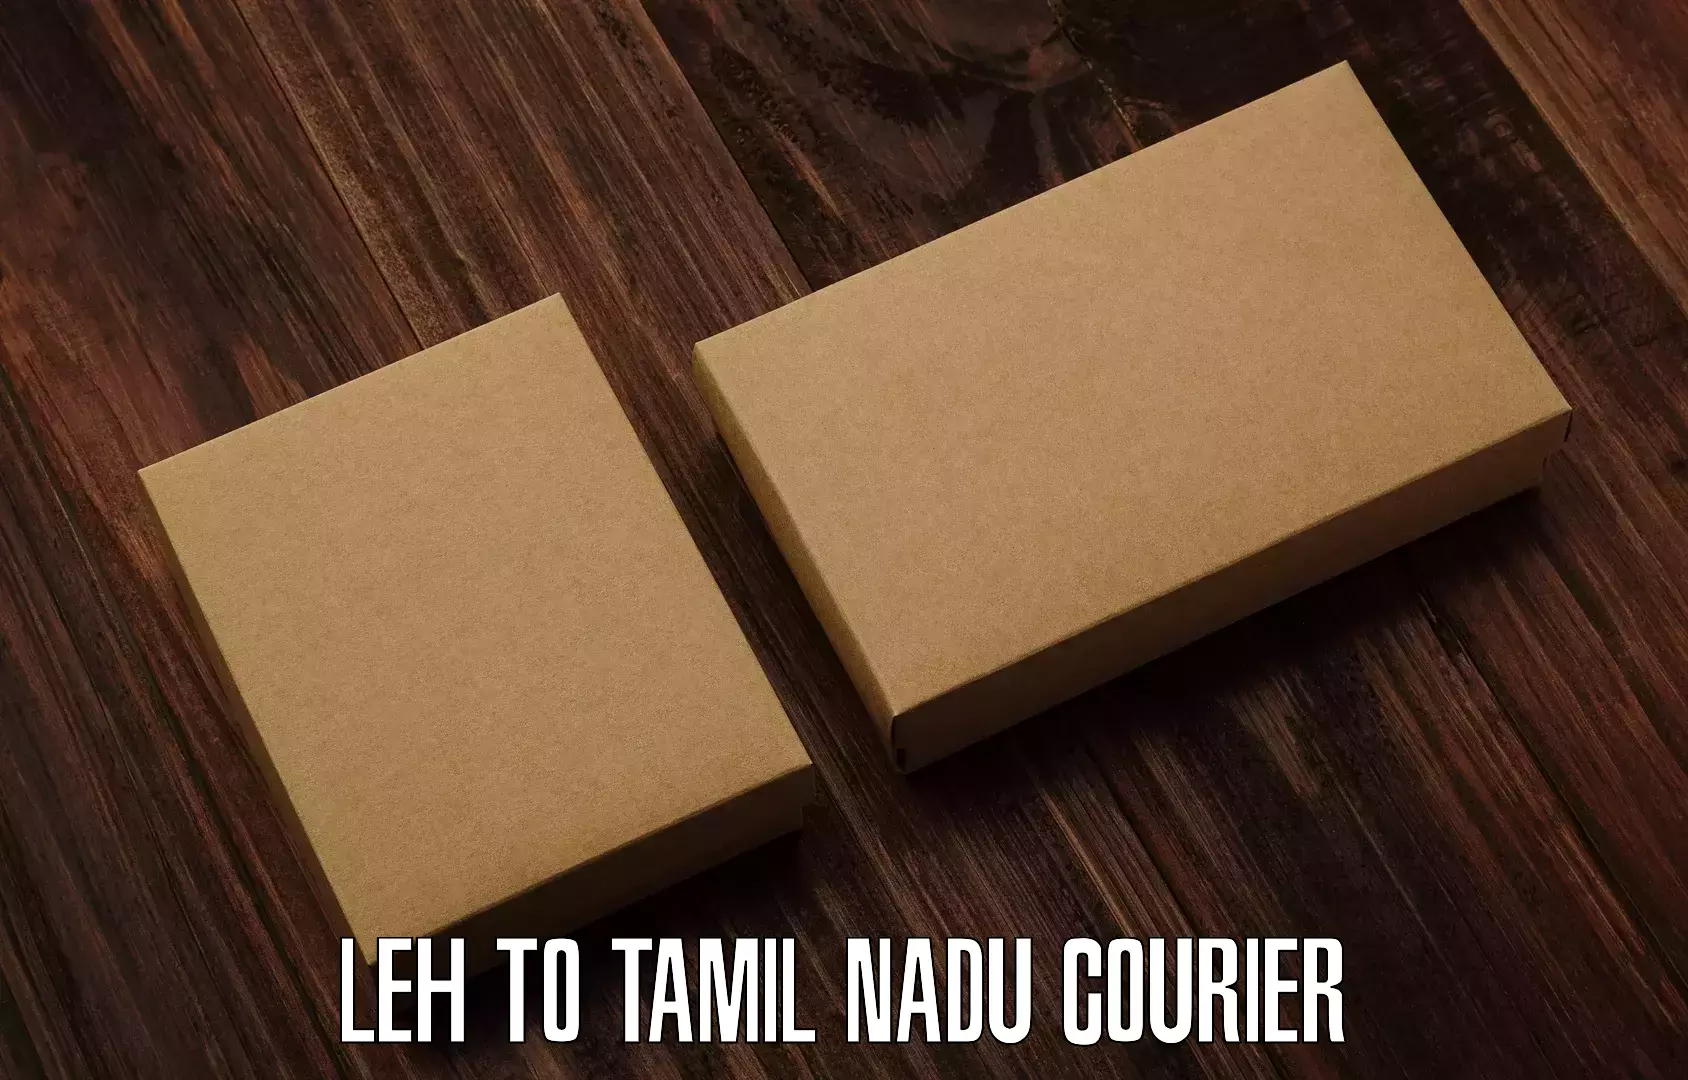 On-call courier service Leh to Tamil Nadu